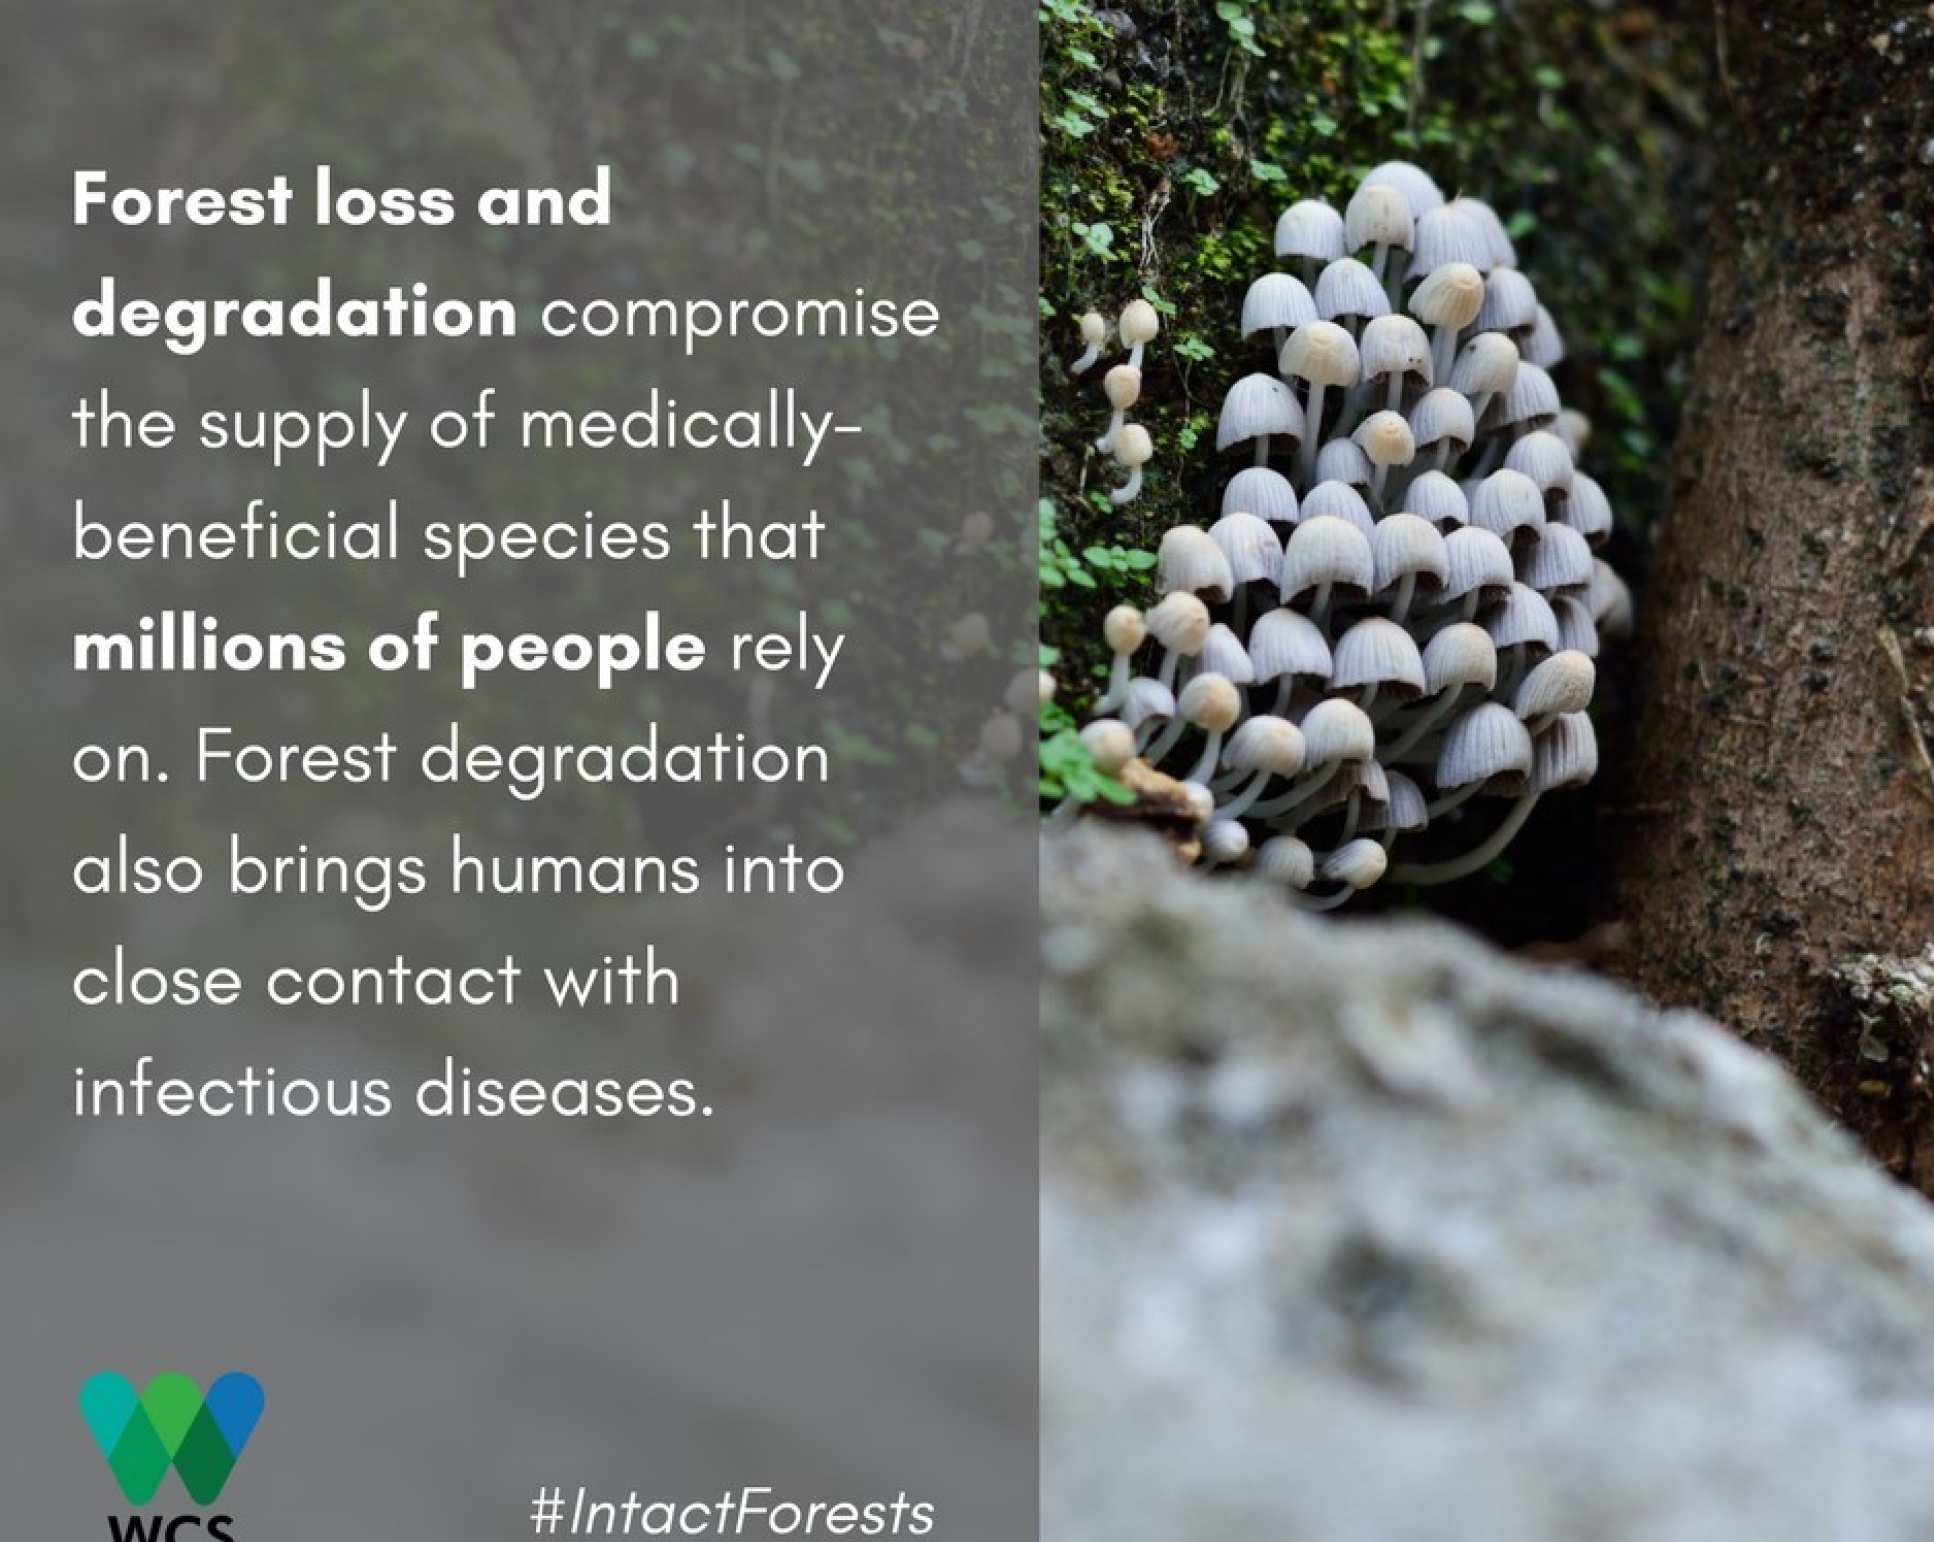 Image of mushrooms with caption: Forest loss and degradation compromise the supply of medically beneficial species that millions of people rely on. Forest degradation also brings humans into close contact with infectious diseases.